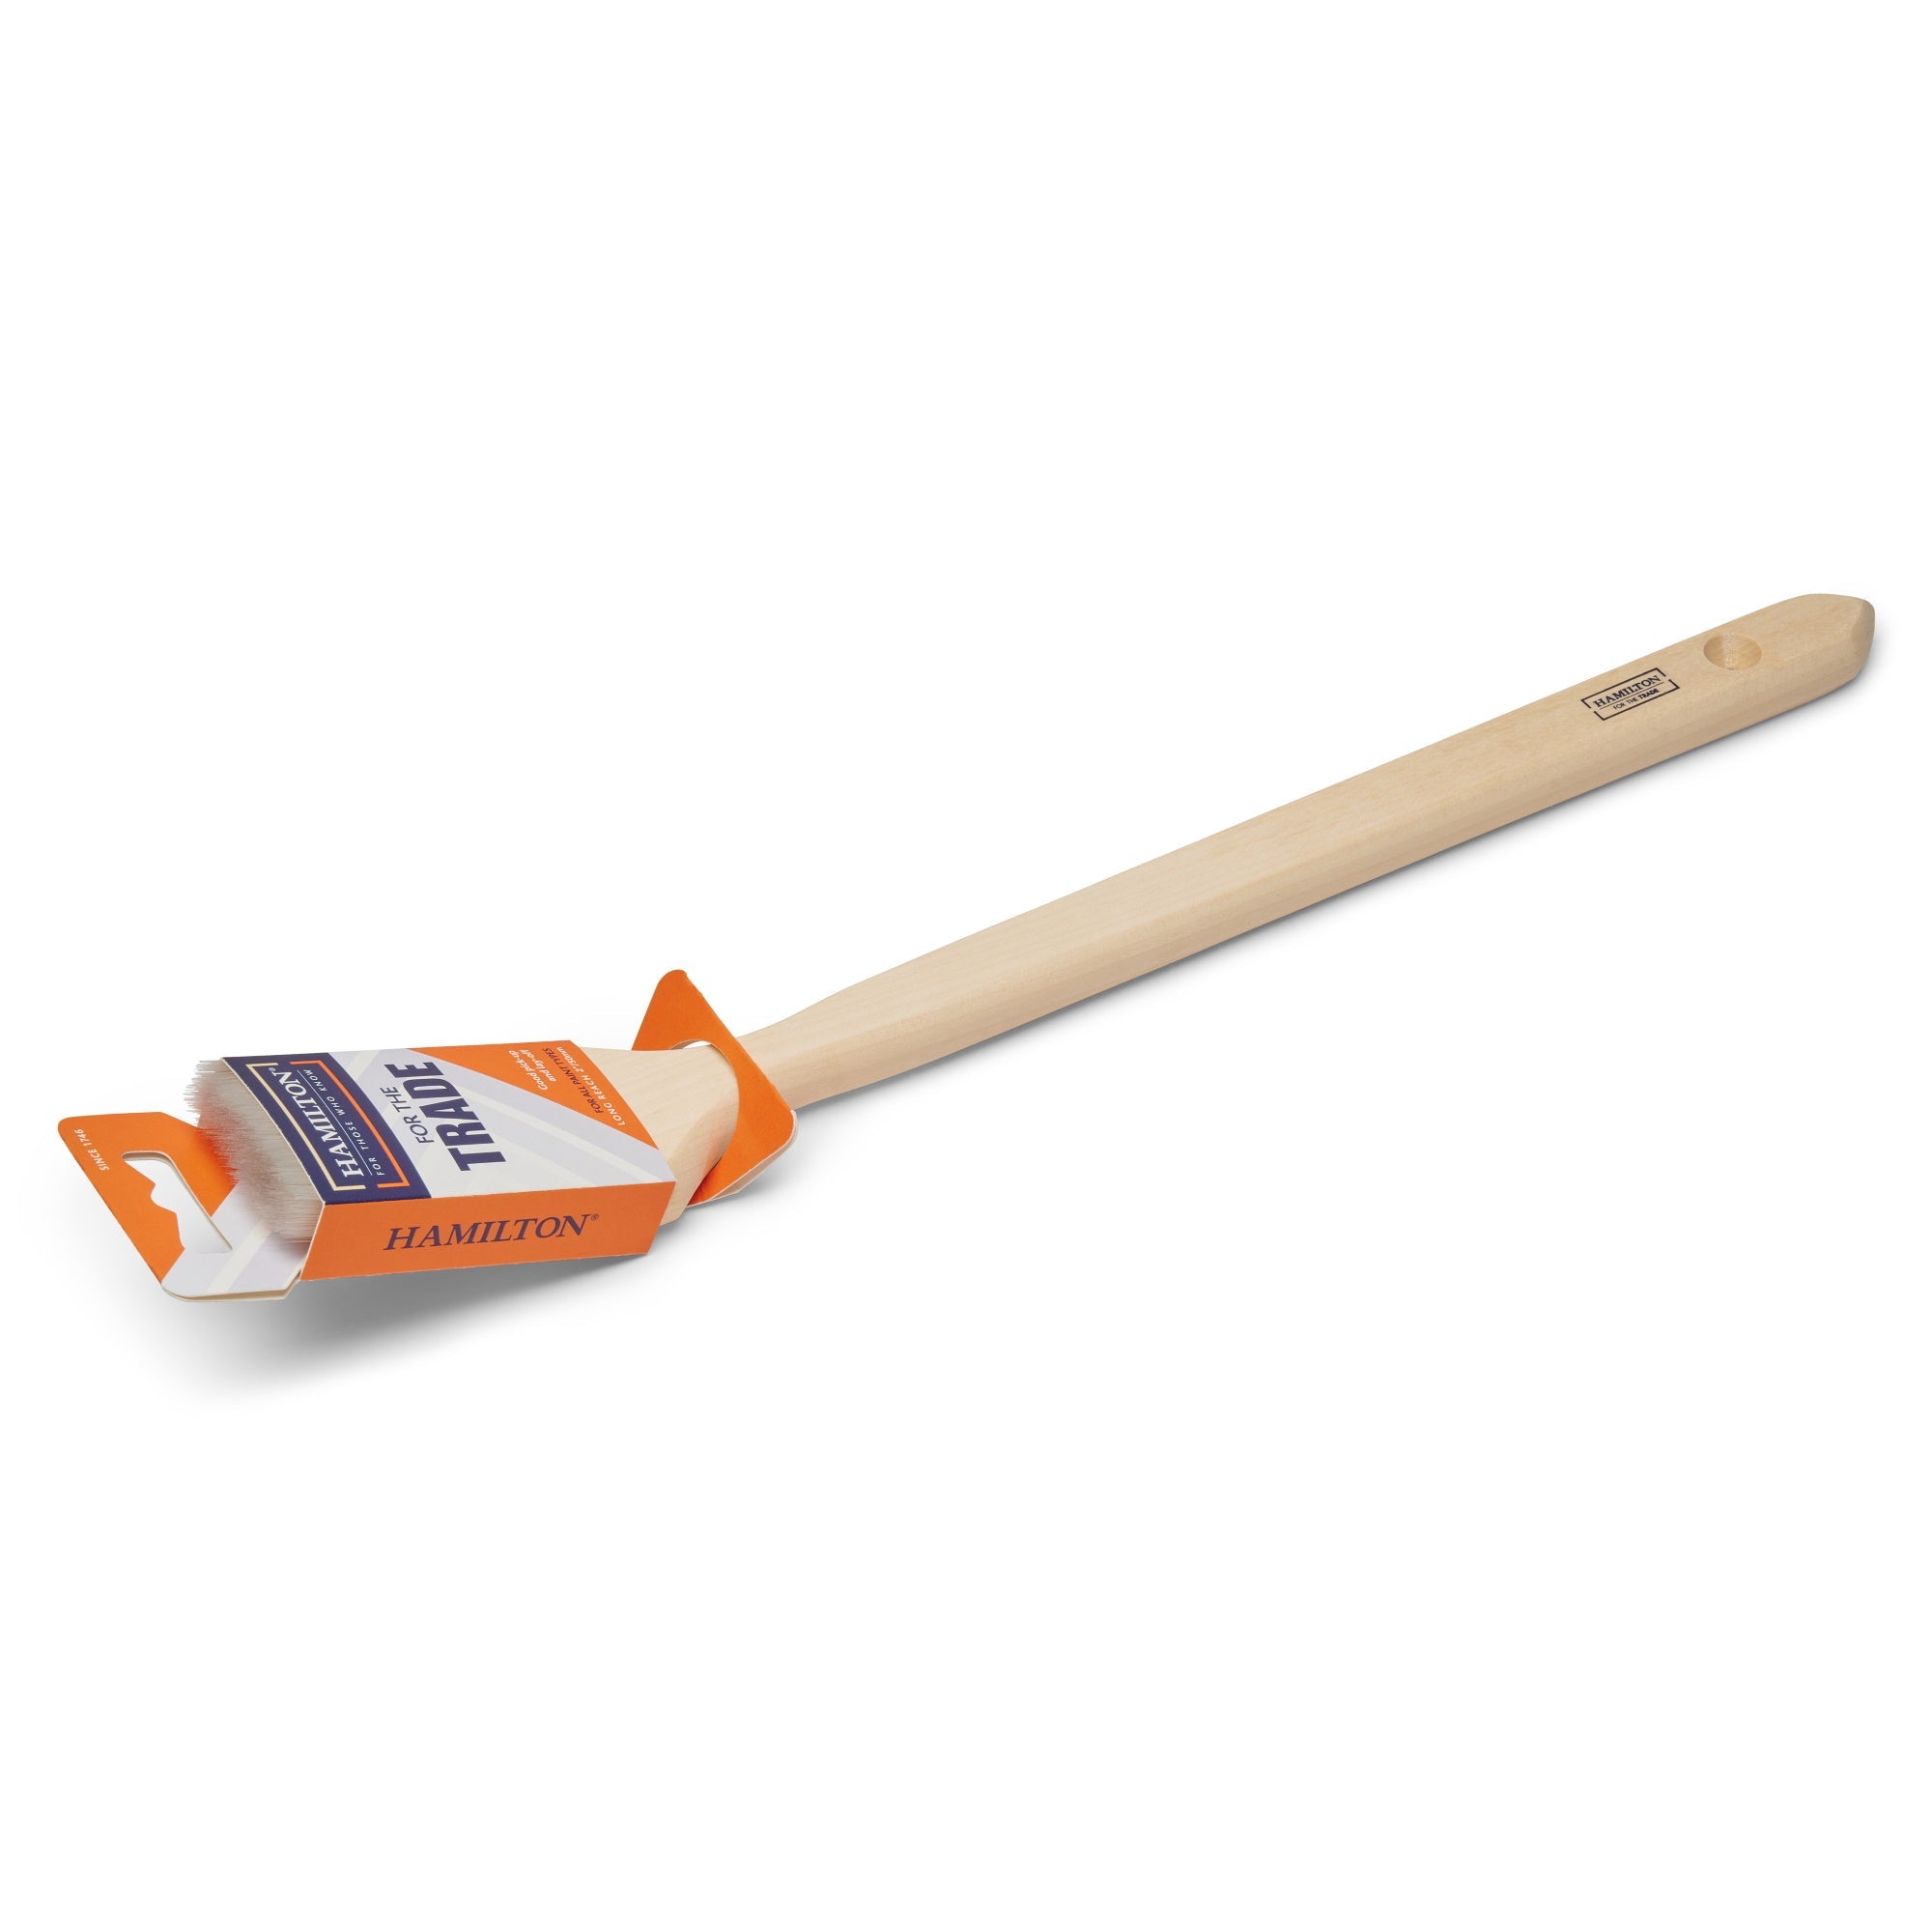 Hamilton For The Trade 3150101-20 Long Reach Angled Brush 50mm - Premium Paint Brushes from HARRIS - Just $3.5! Shop now at W Hurst & Son (IW) Ltd